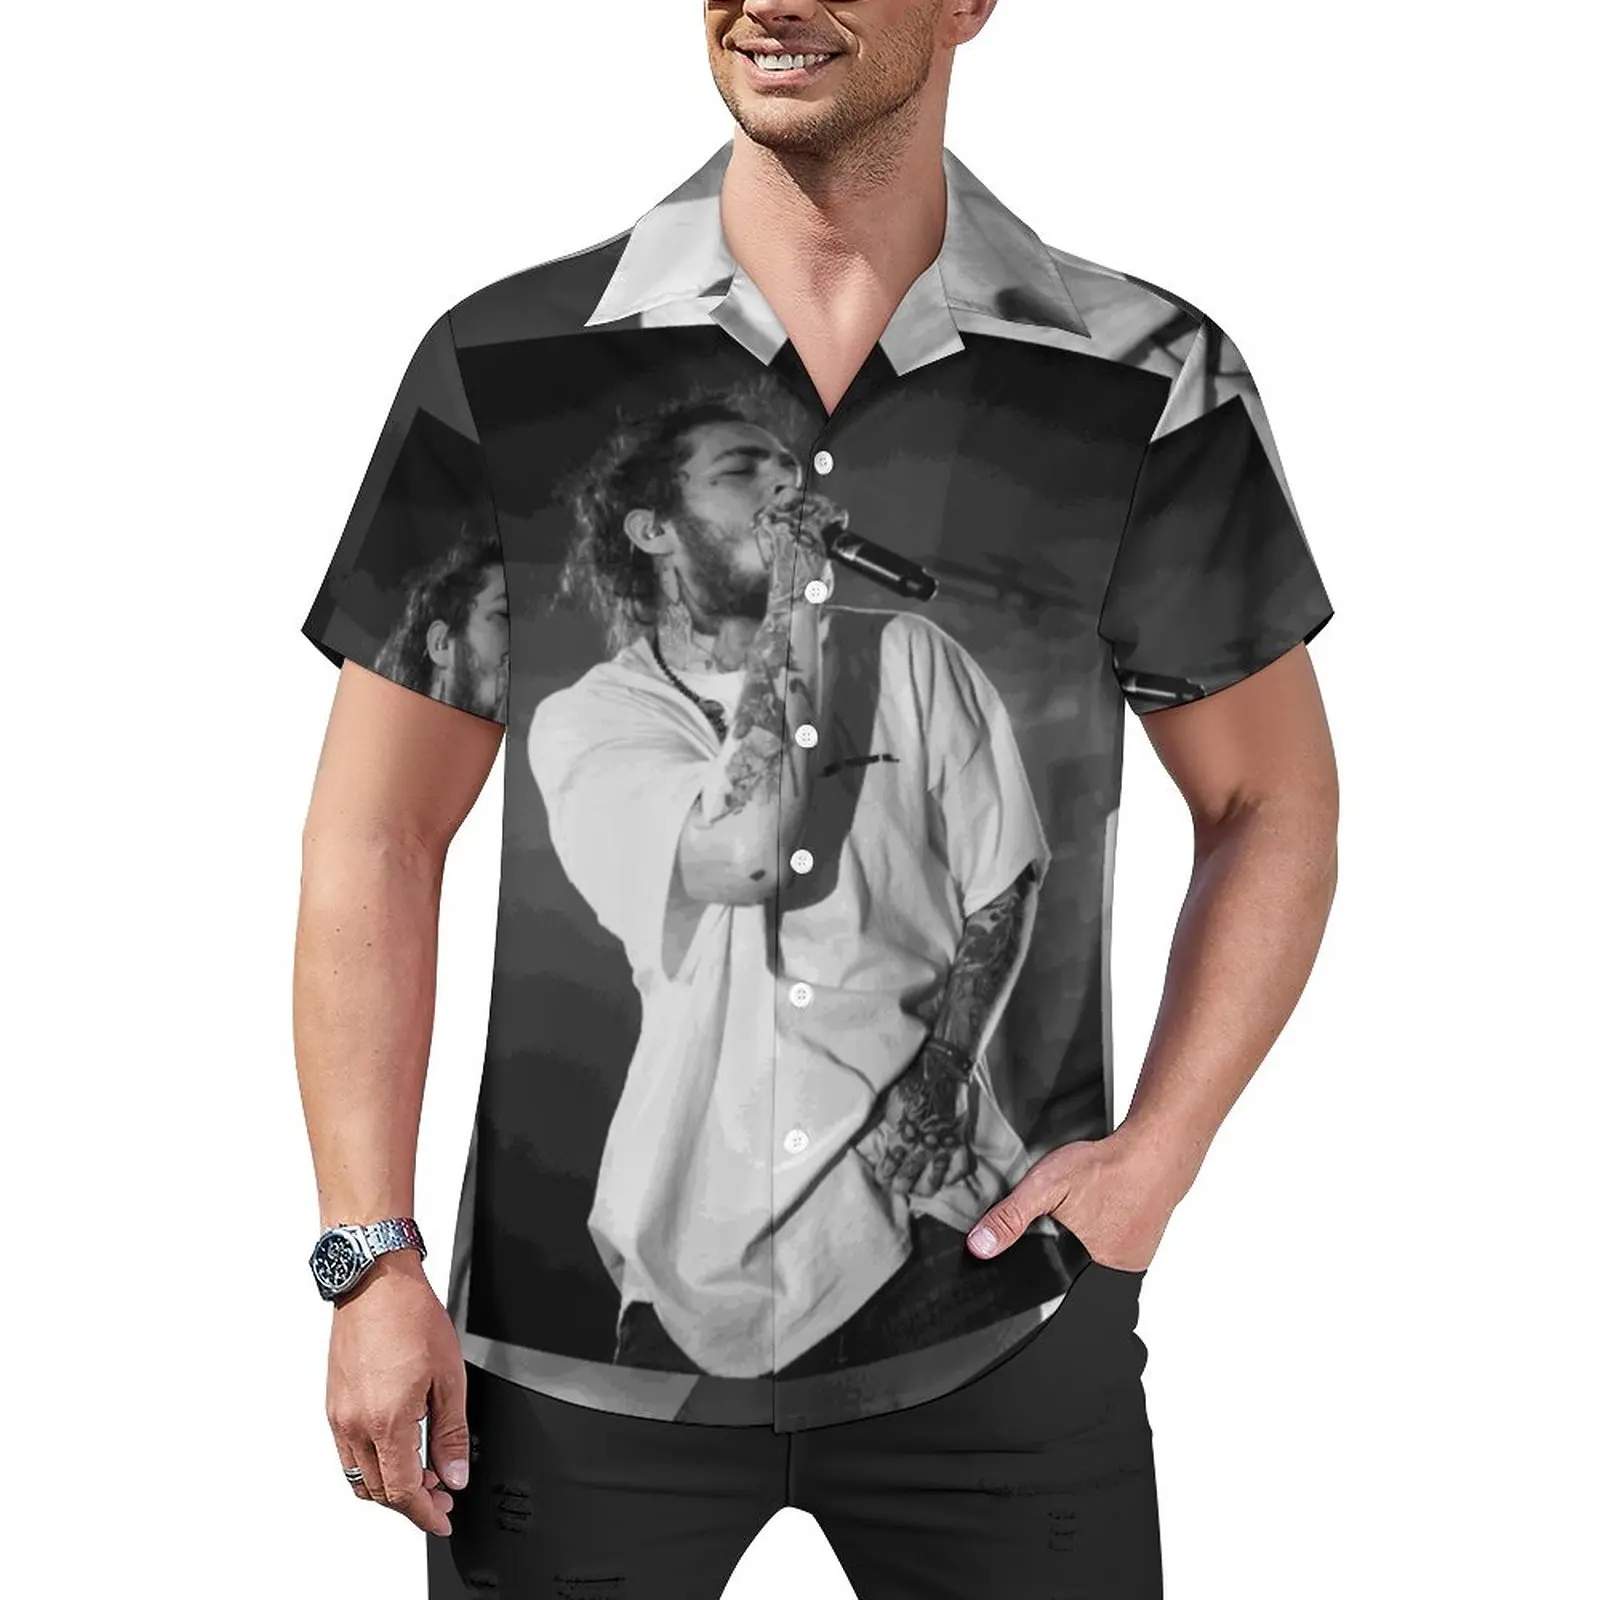 

Black White Malone On Concert Loose Shirt Men Beach Post Malone Rapper Surprise Cool Casual Shirts Short Sleeve Fashion Blouses